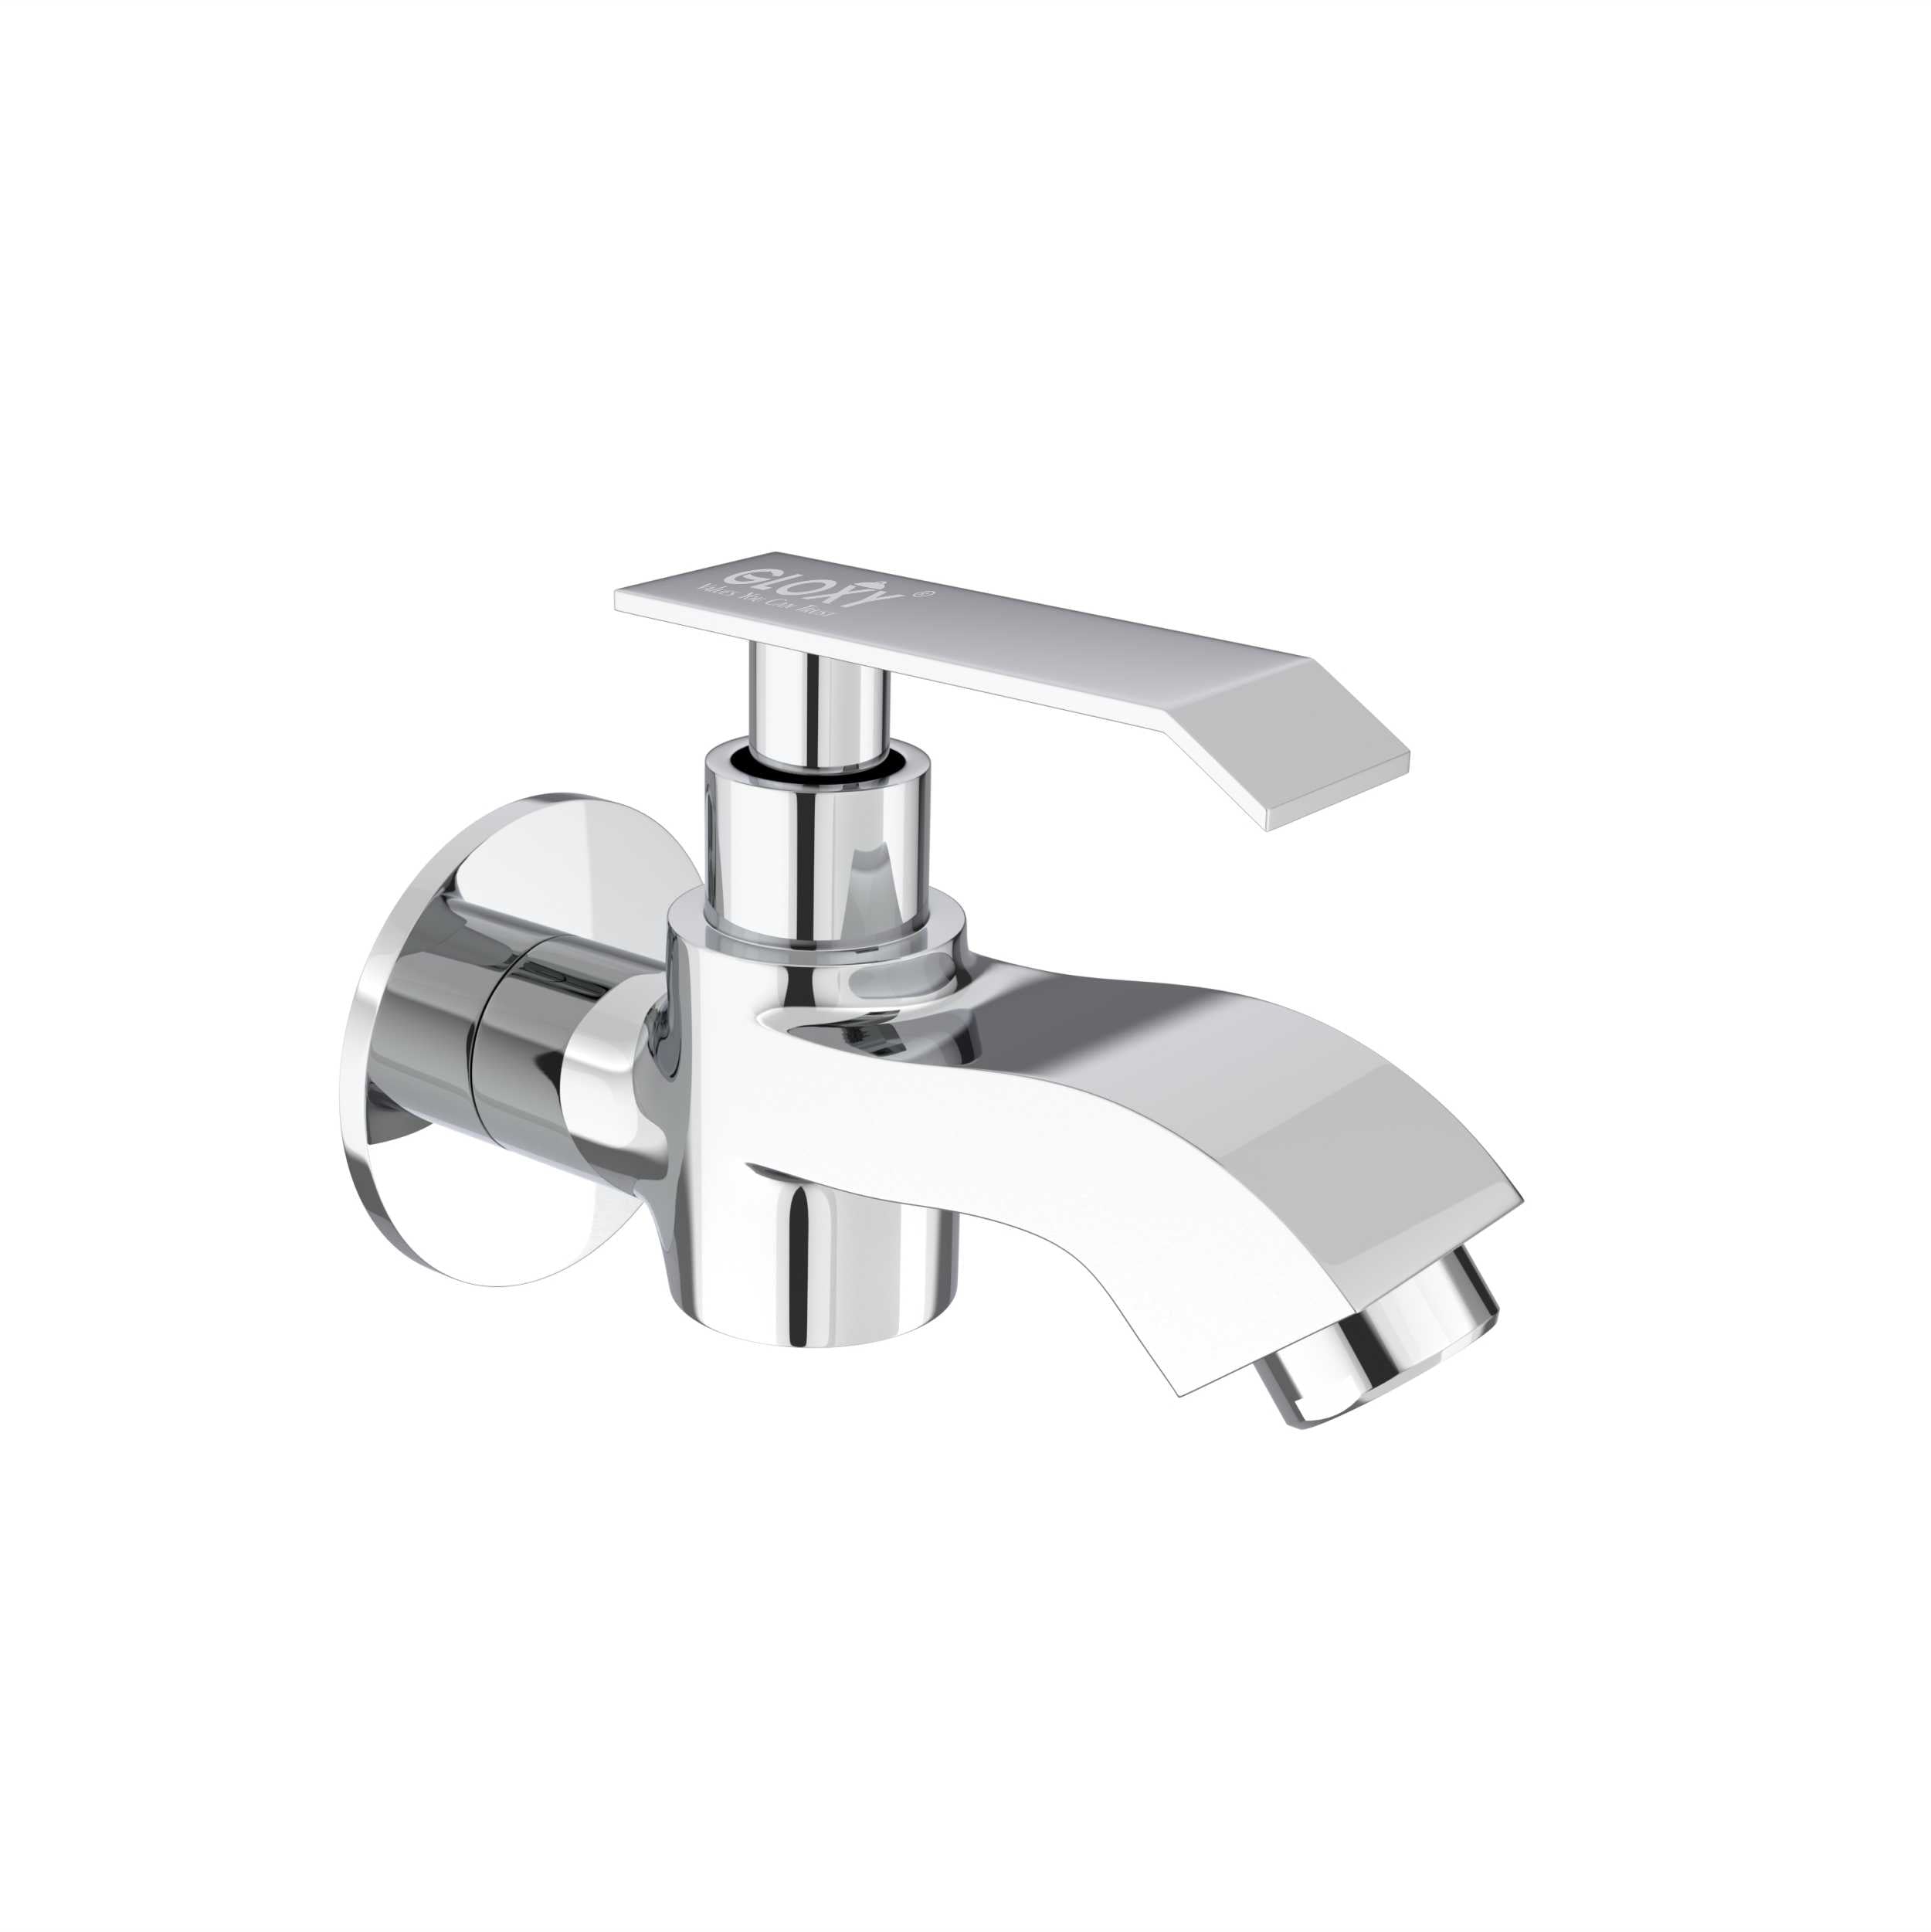 Chrome Finish Wall Mounted Tap Kitchen, Bathrooms, Gardens